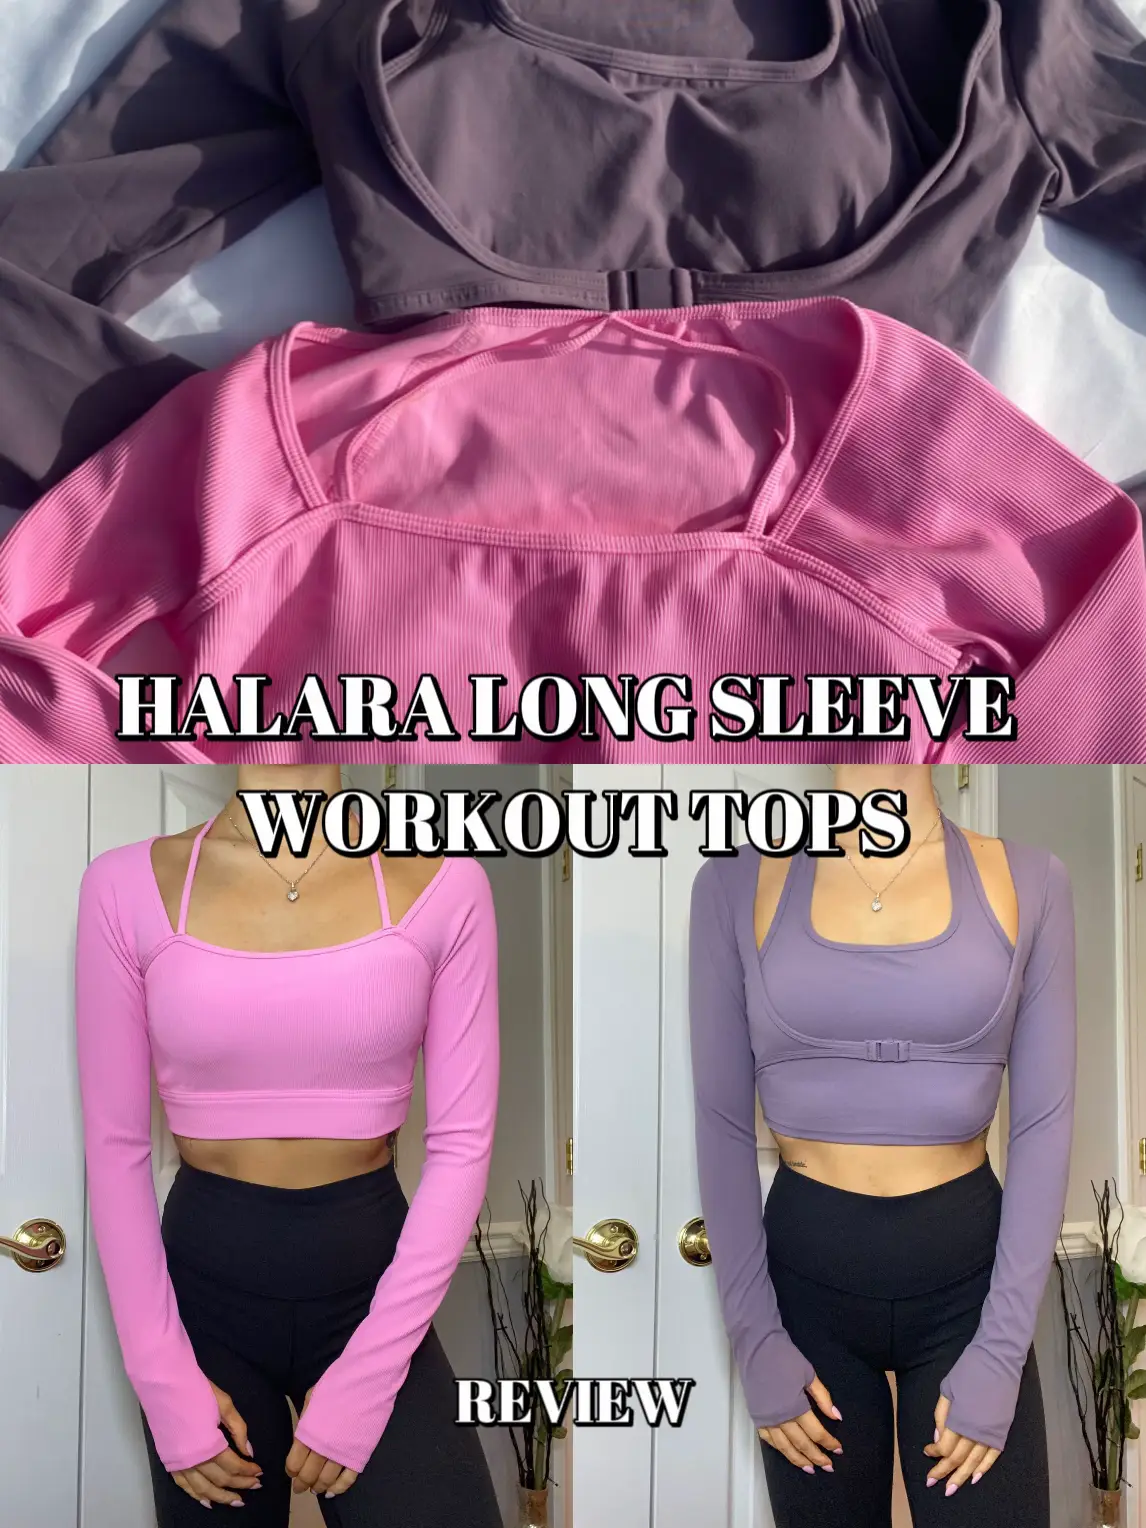 Halara Long Sleeve Workout Top Review, Gallery posted by Lexirosenstein